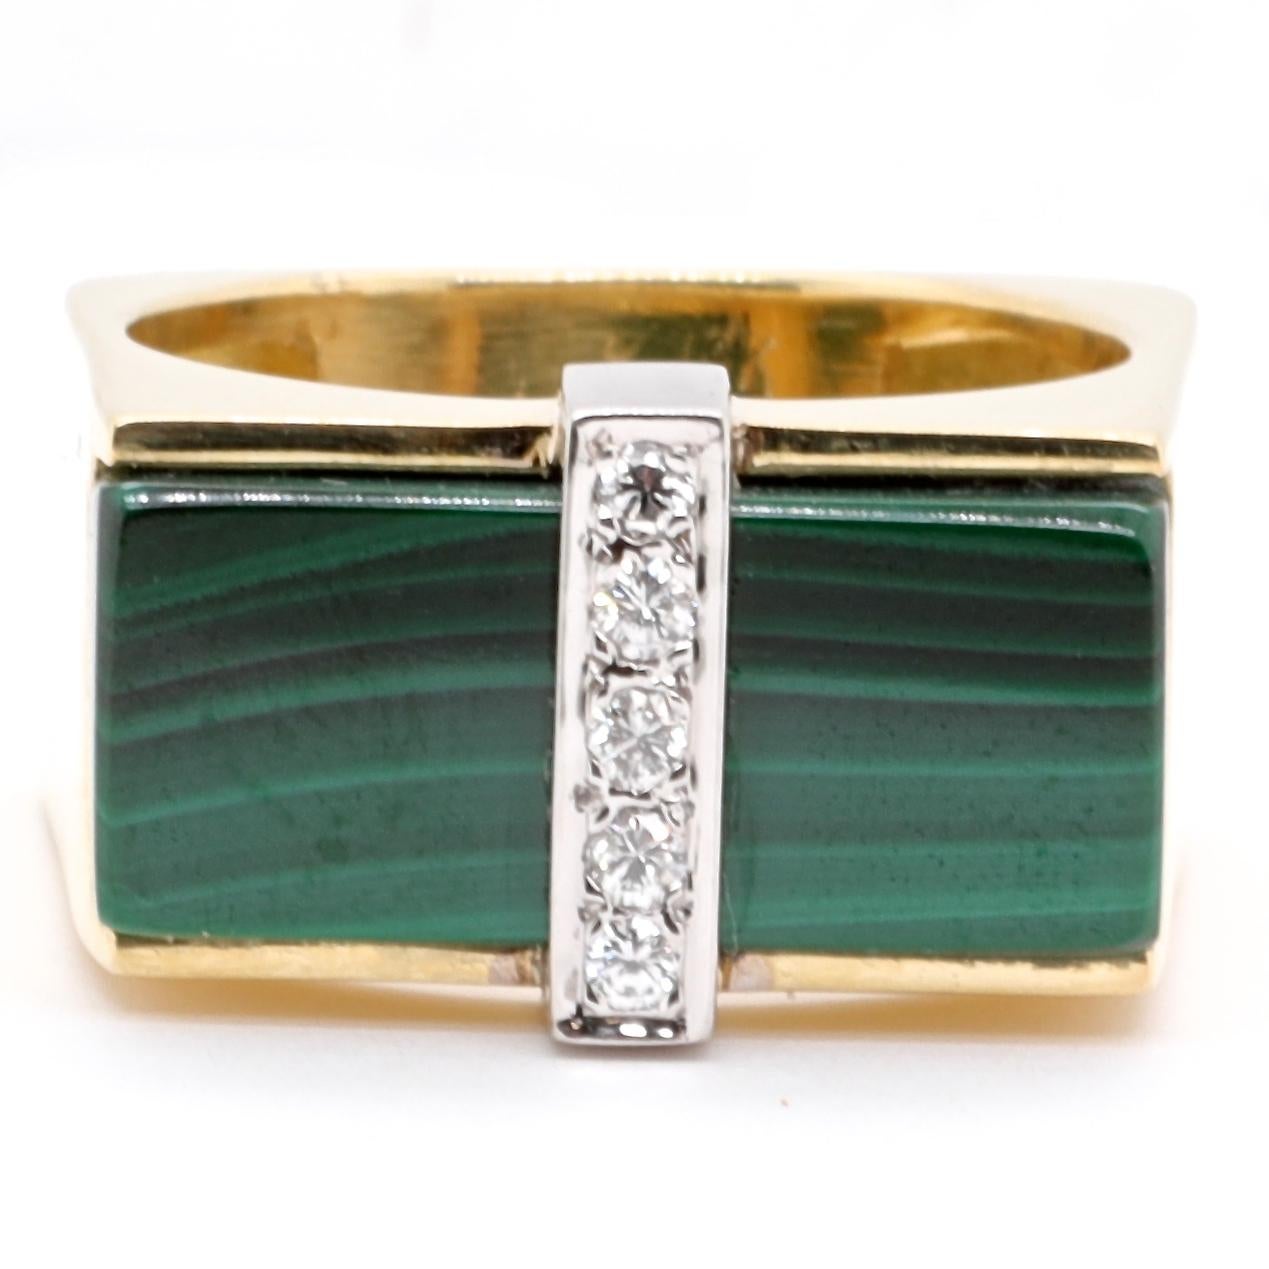 Gold and green are the hottest new combination of 2021. Get yourself the look that everyone desires. The Malachite diamond 14k gold ring is an architectural delight. Geometrical symmetry and proportions, hugged by the buttery yellow gold make this